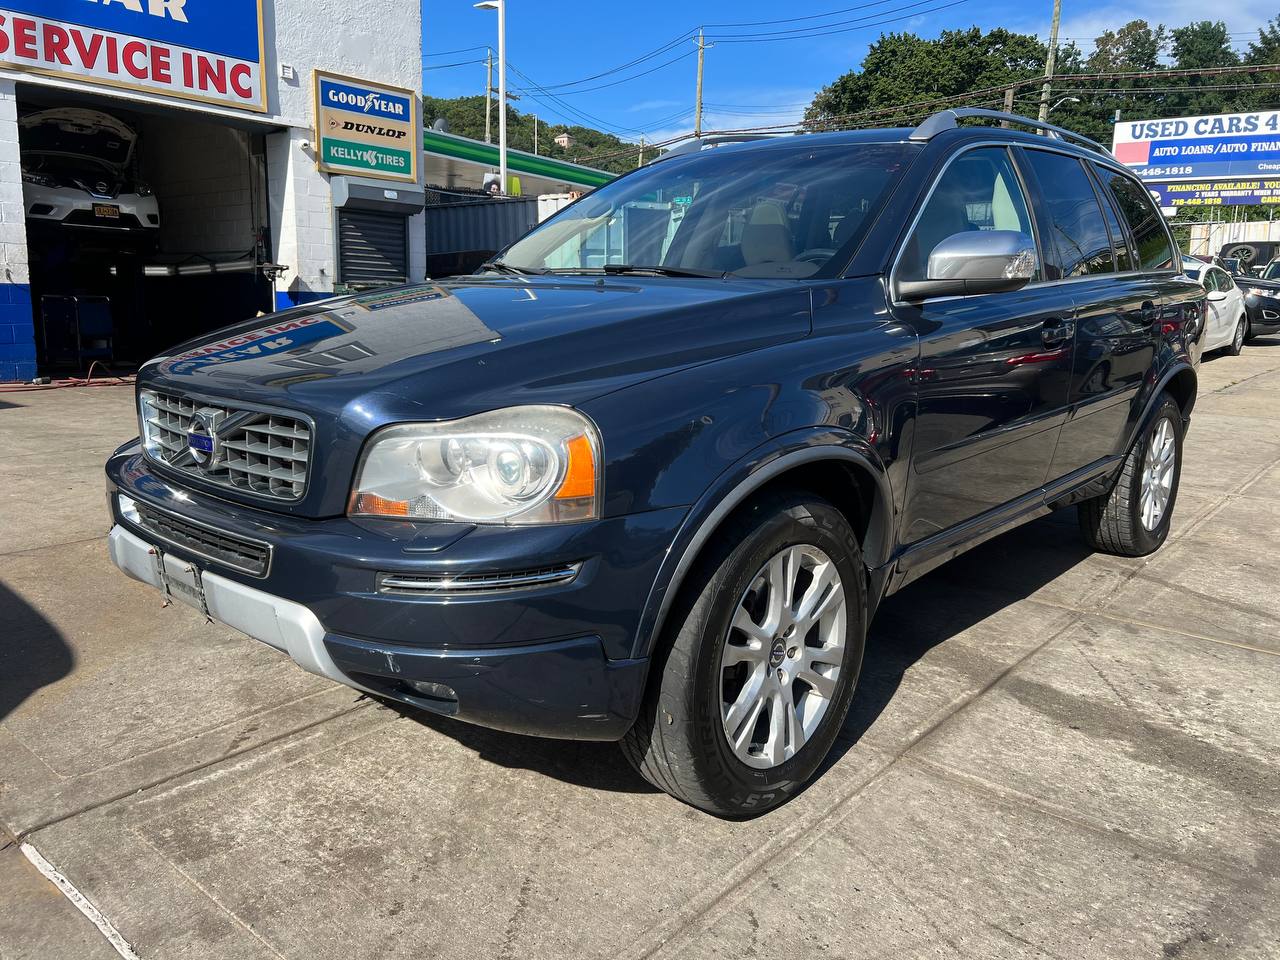 Used Car - 2013 Volvo XC90 for Sale in Staten Island, NY